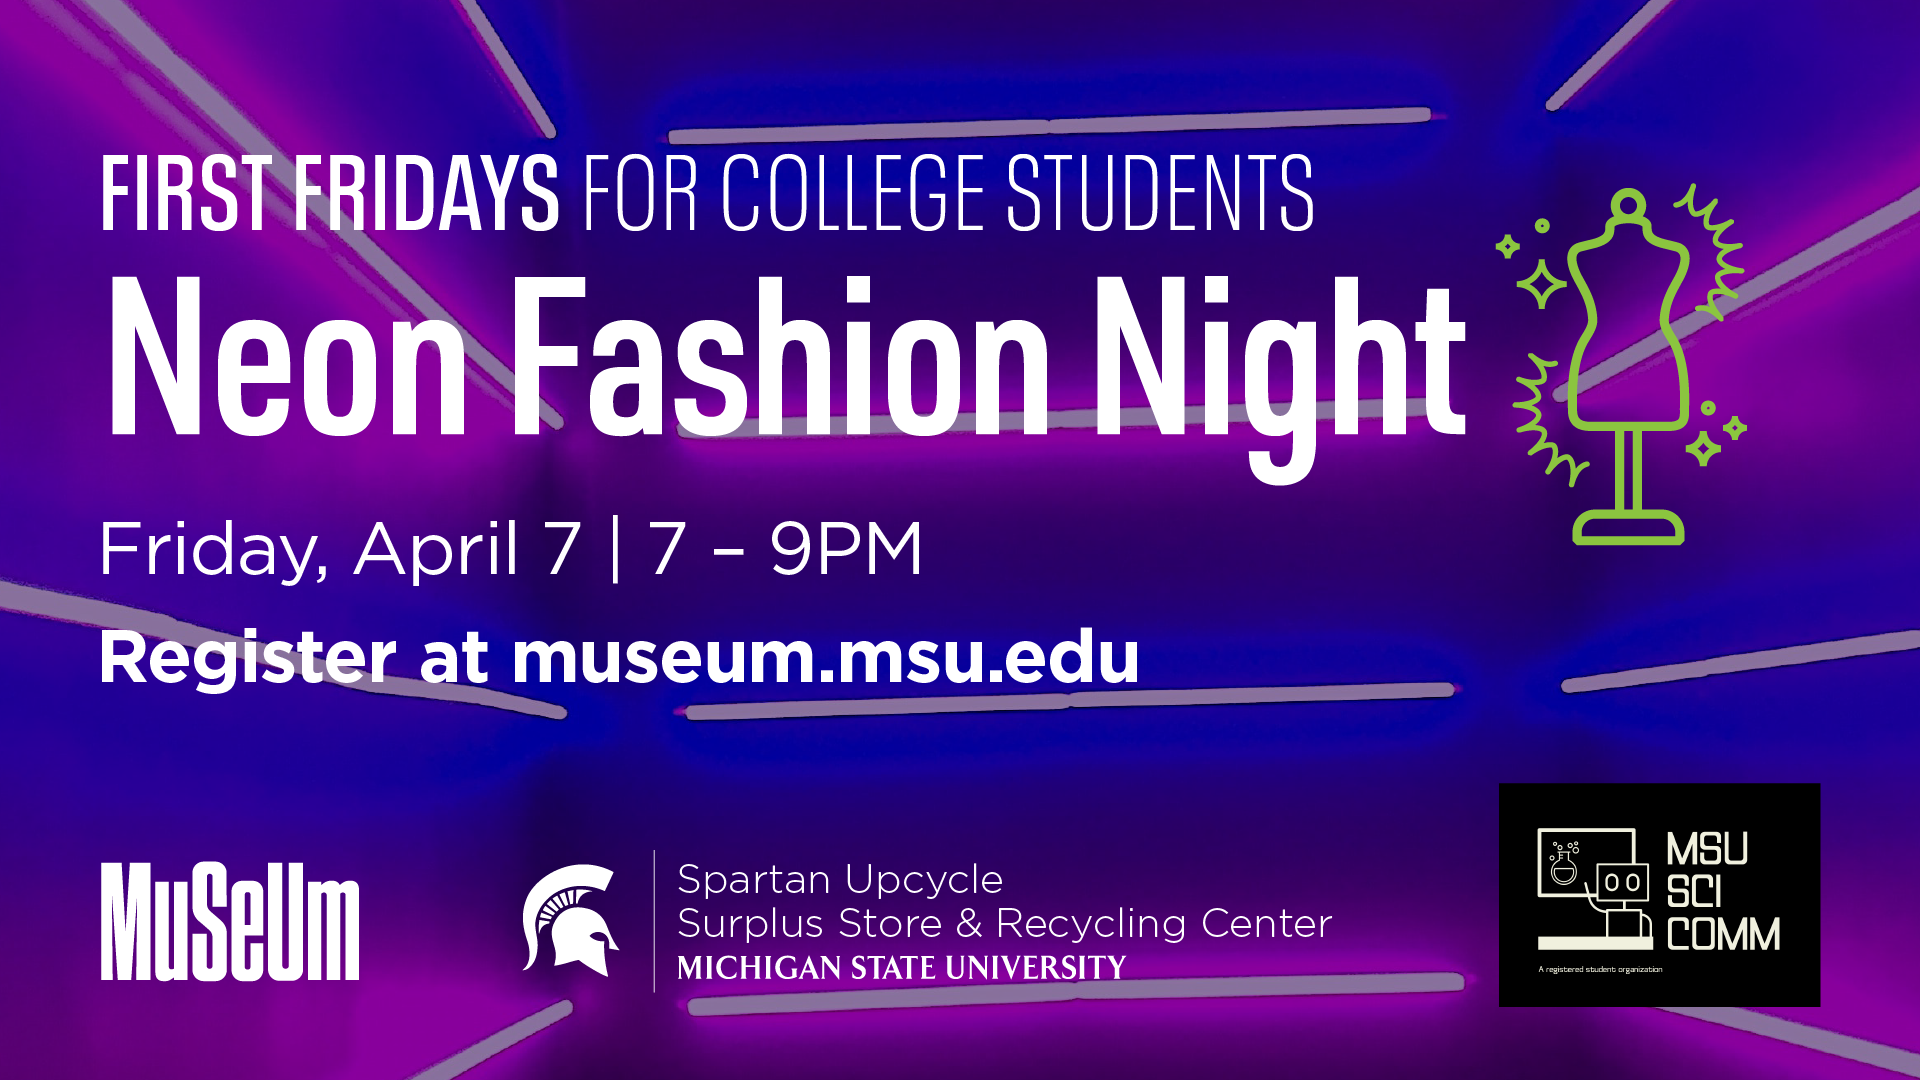 First Fridays for College Students Neon Fashion Night Friday, April 7 | 7-9 pm. Register at museum.msu.edu. Logos for MSU Museum, Spartan Upcycle - Surplus Store and Recycling Center, and MSU SciComm